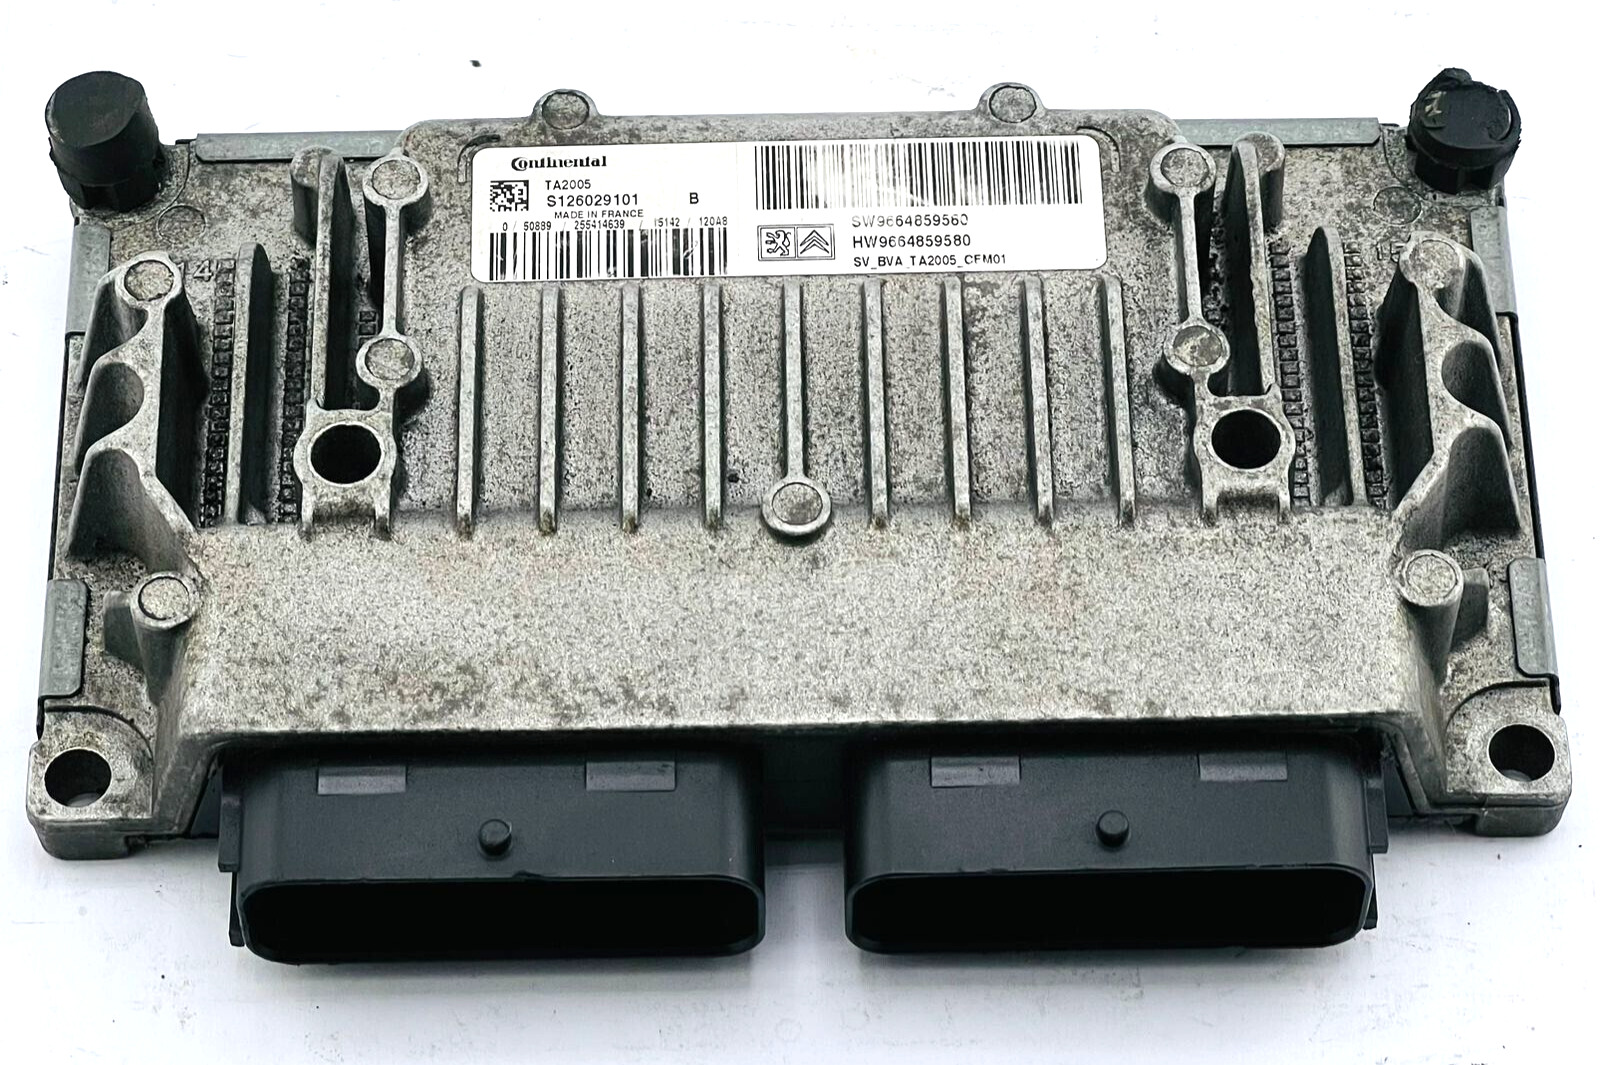 OEM Automatic Gearbox Computer 9664859580 S126029101B For Peugeot 207 1.6L